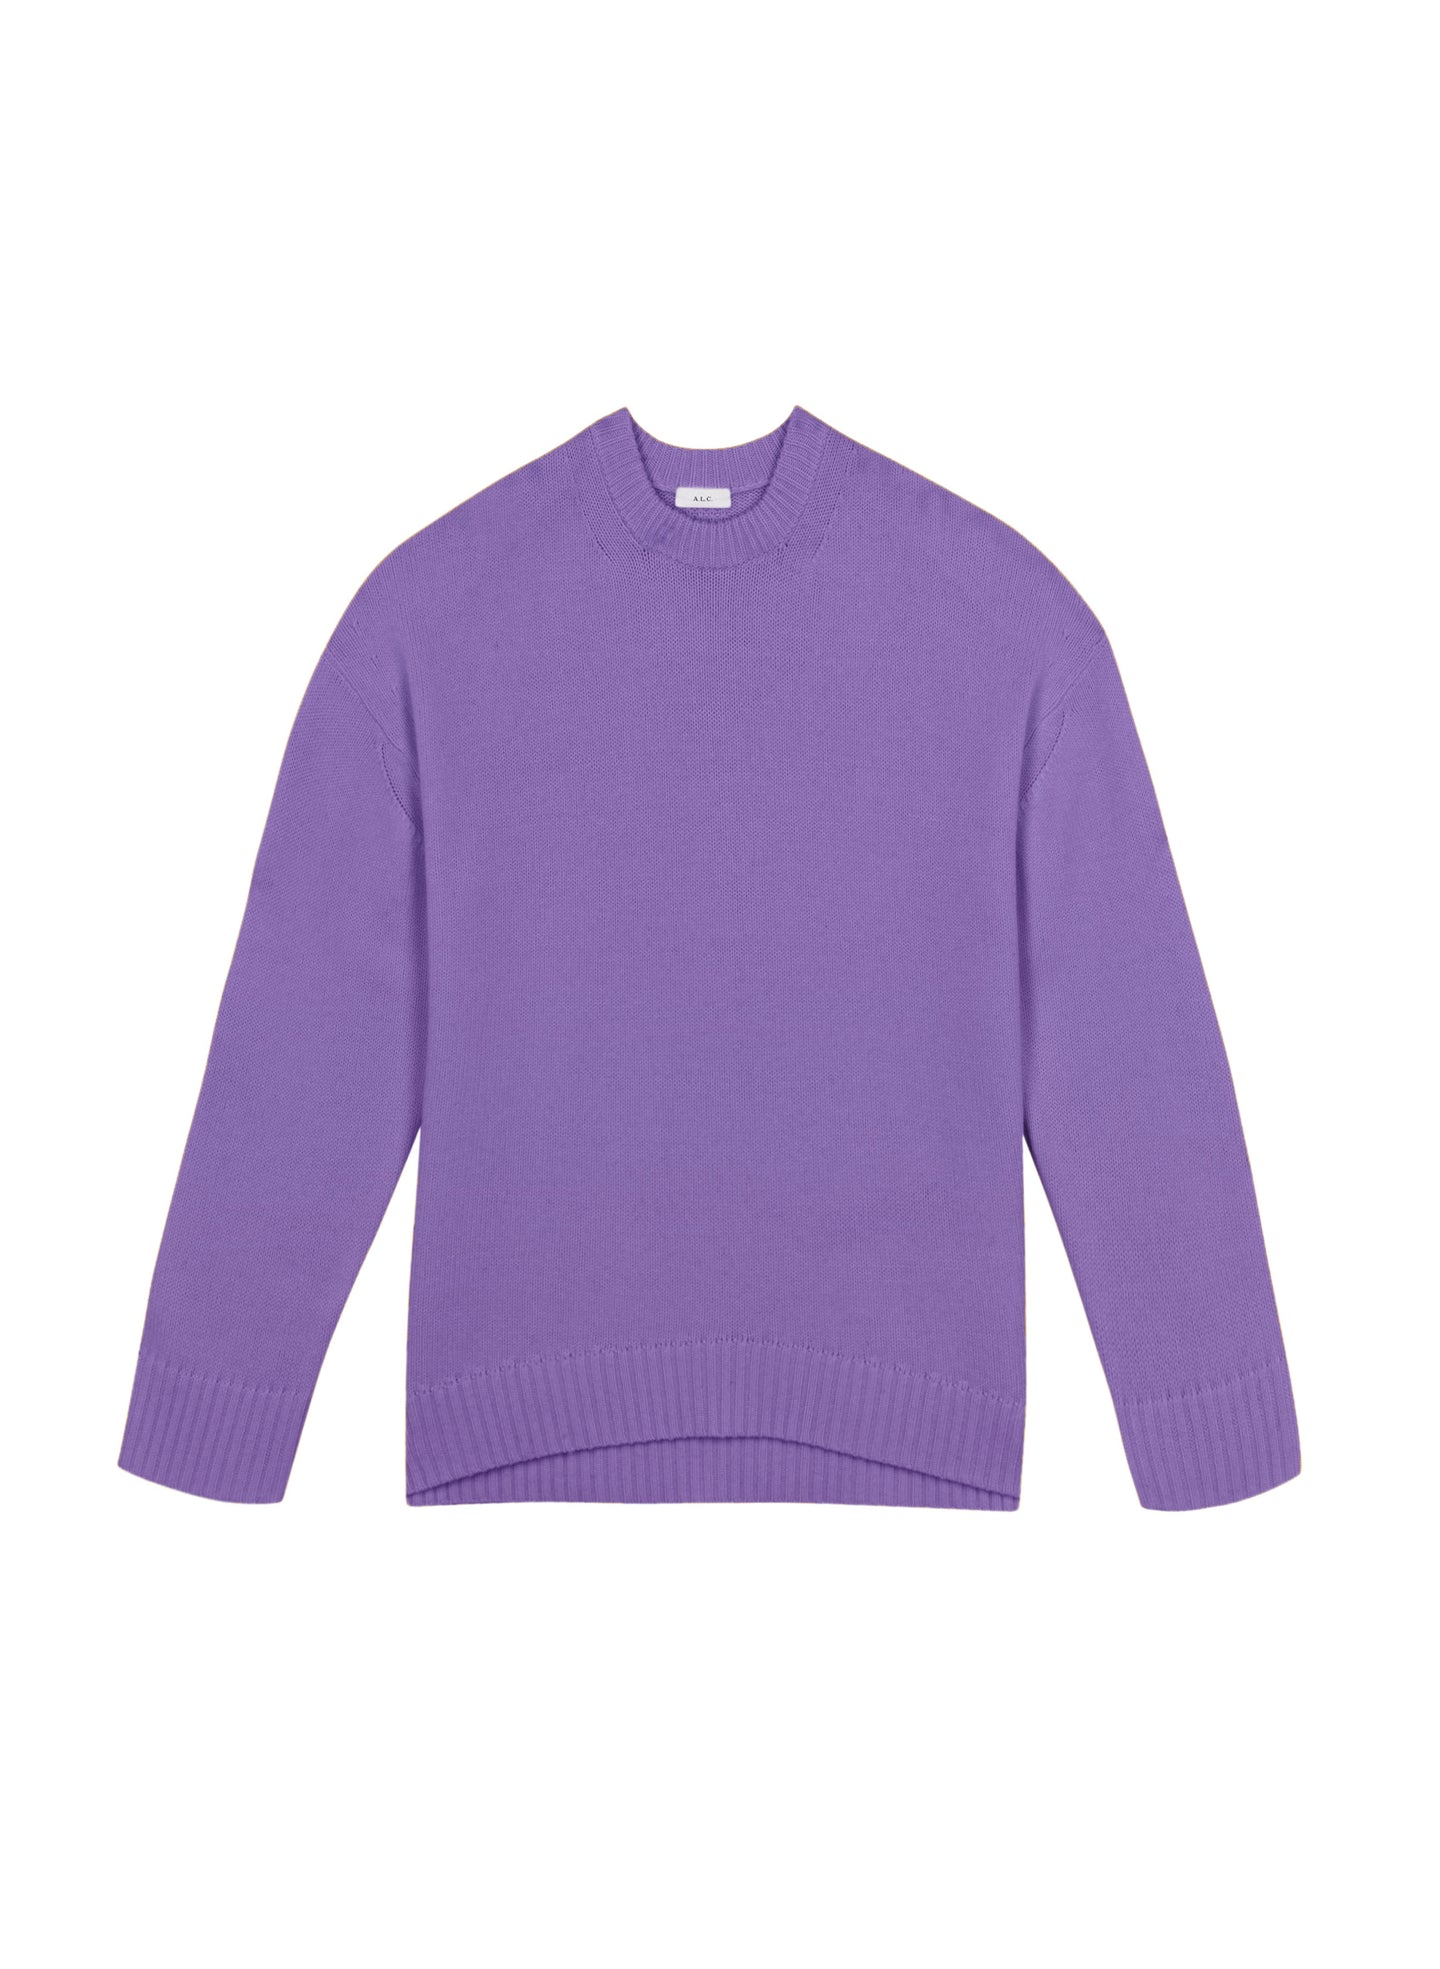 flat lay view of light purple cashmere long sleeve sweater